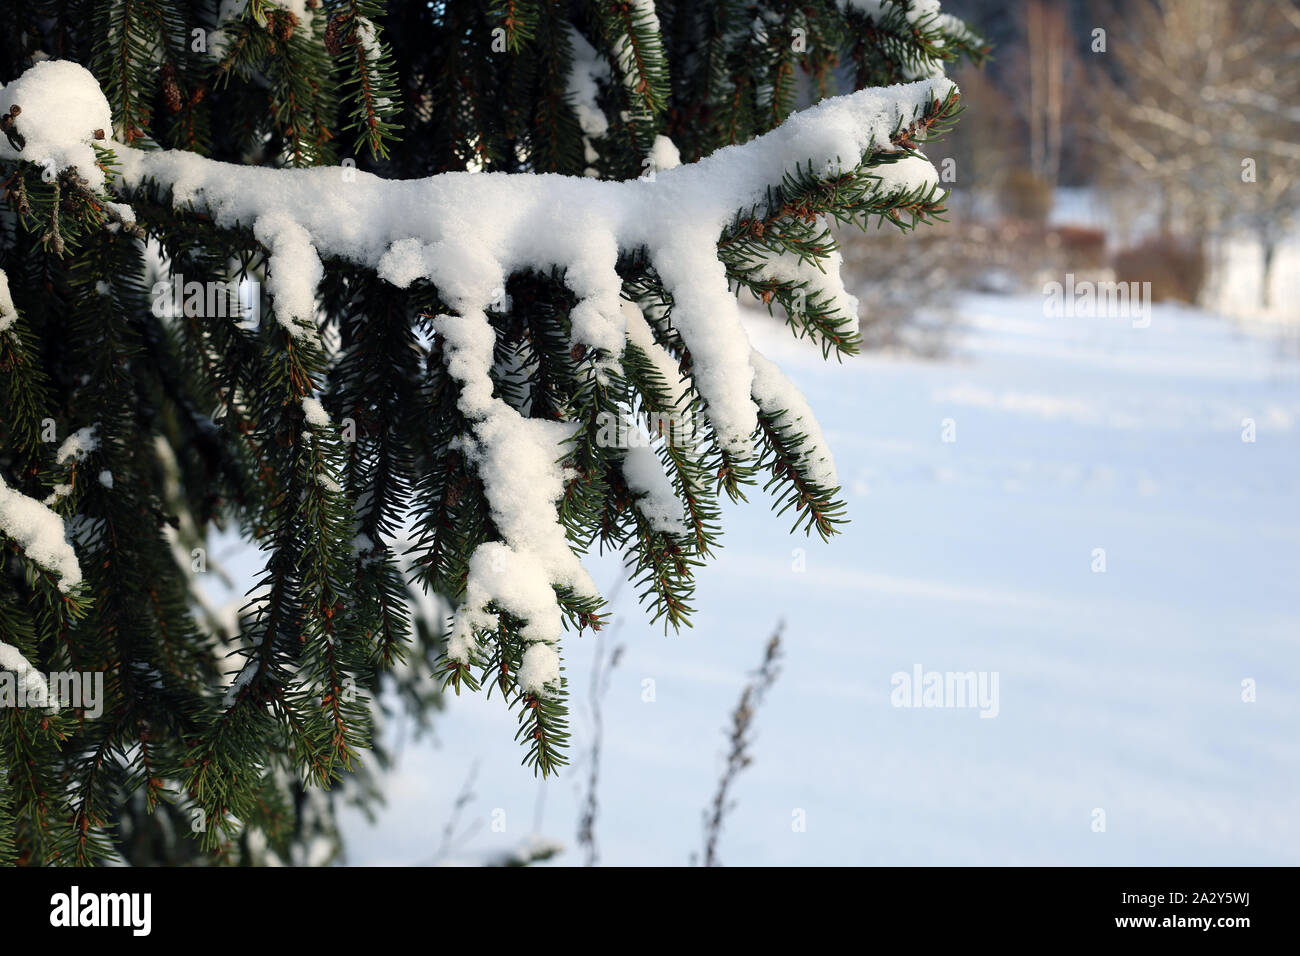 Spruce tree branches with plenty of heave snow on them. Photographed ...